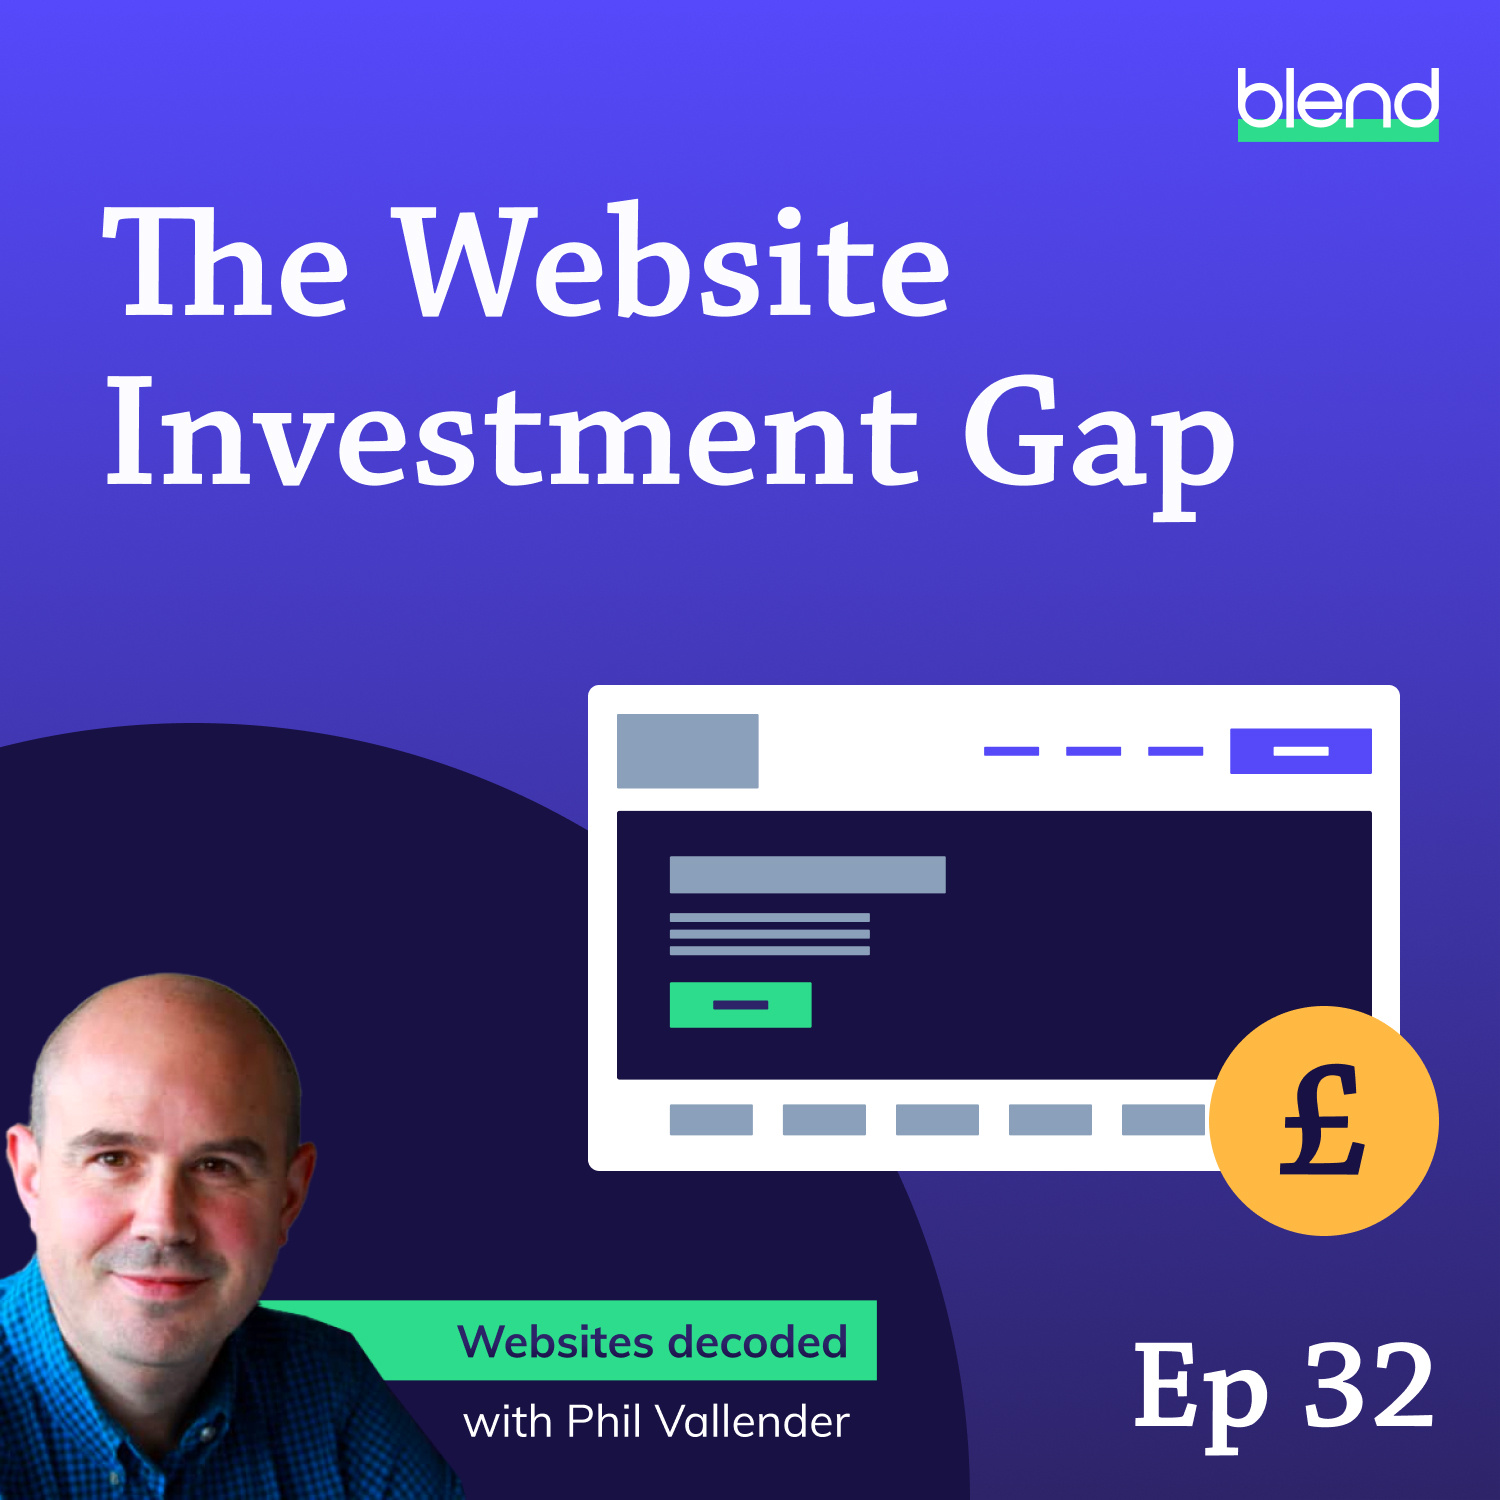 Businesses Are Severely Underinvesting in Their Website